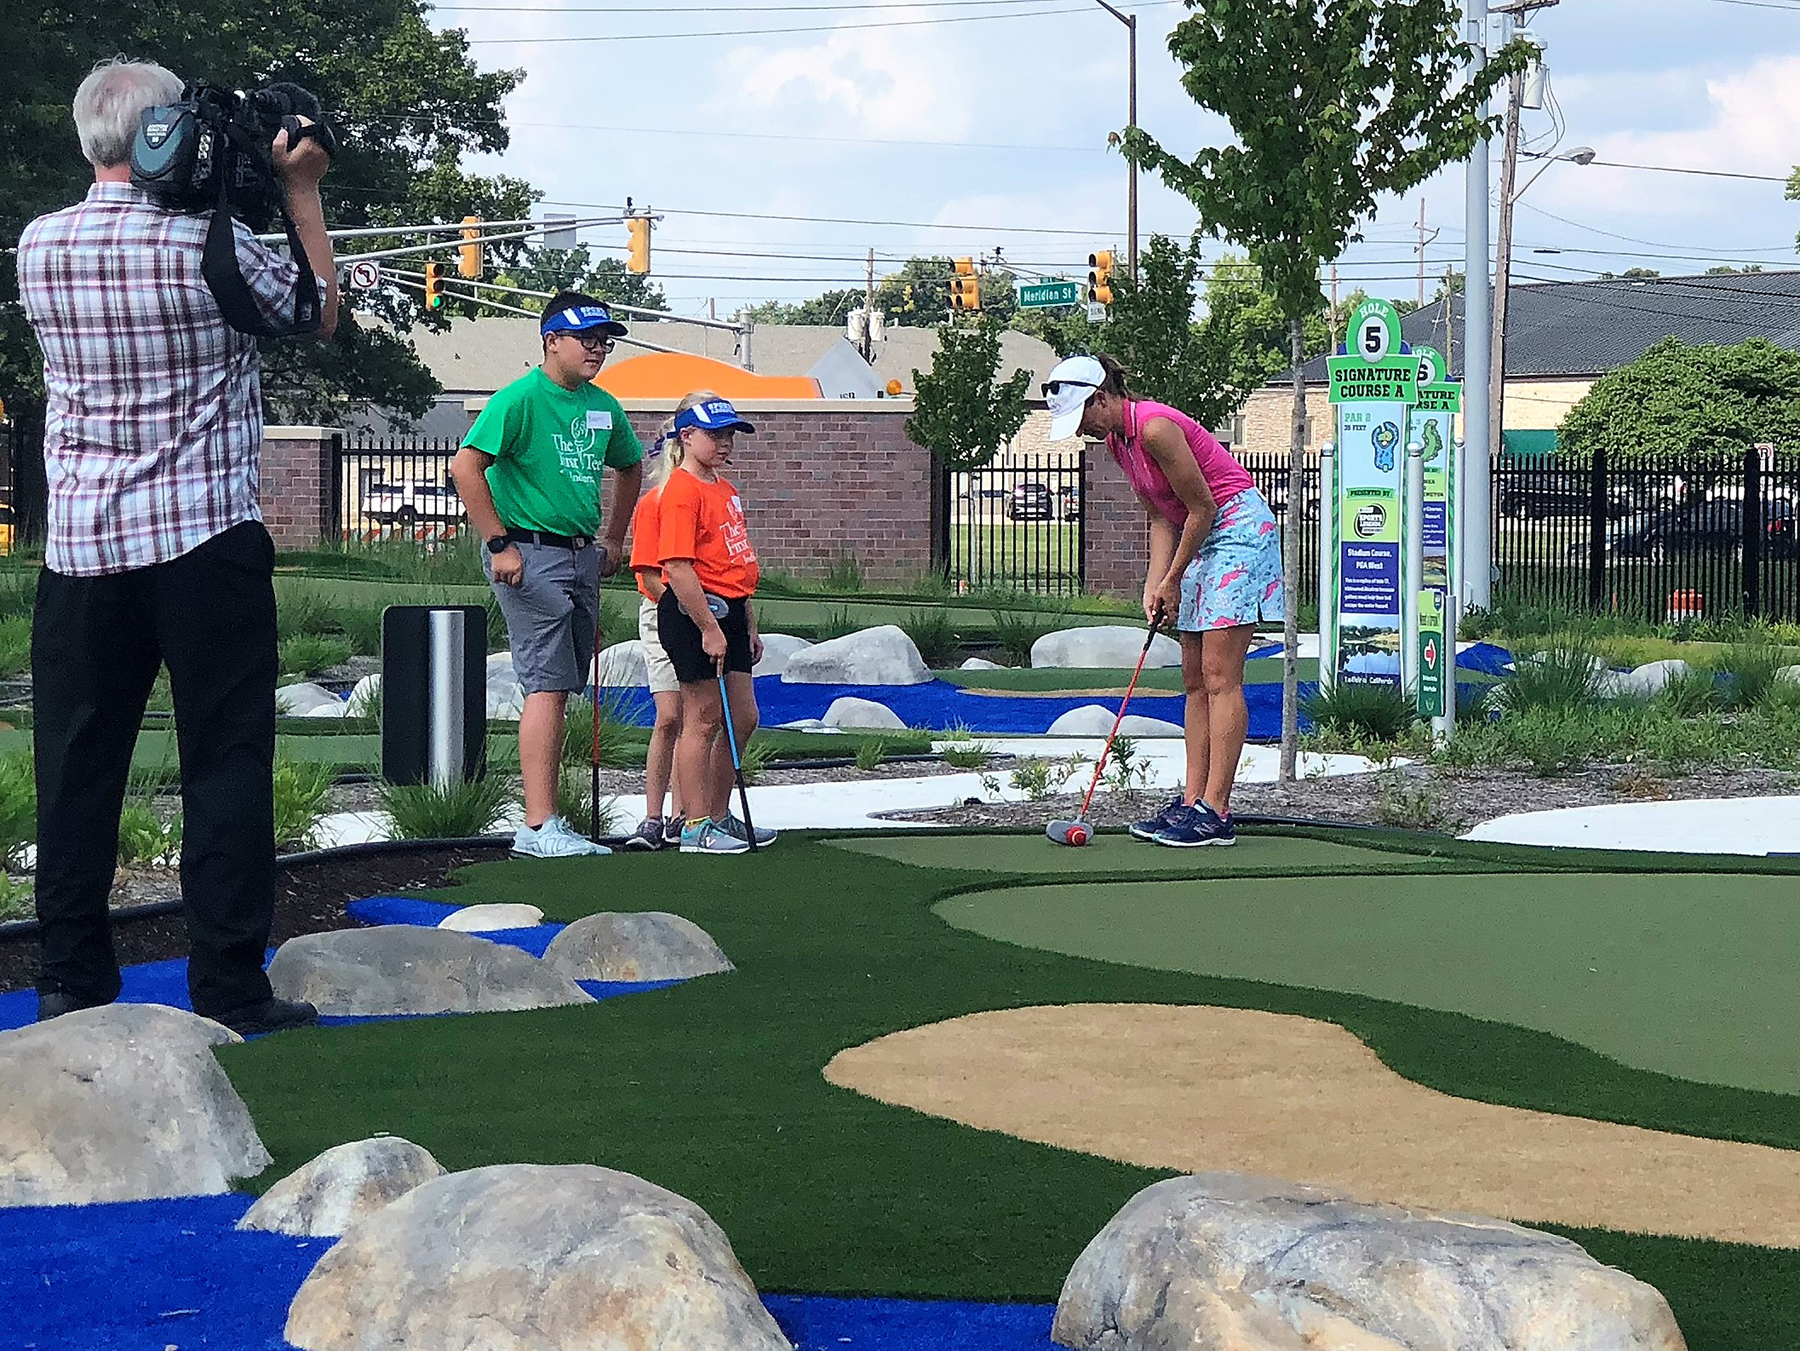 LPGA pro Danah Bordner (splits her time between Indianapolis, IN and Ohio) shared skills and secrets to success with youngsters at The Children’s Museum of Indianapolis.